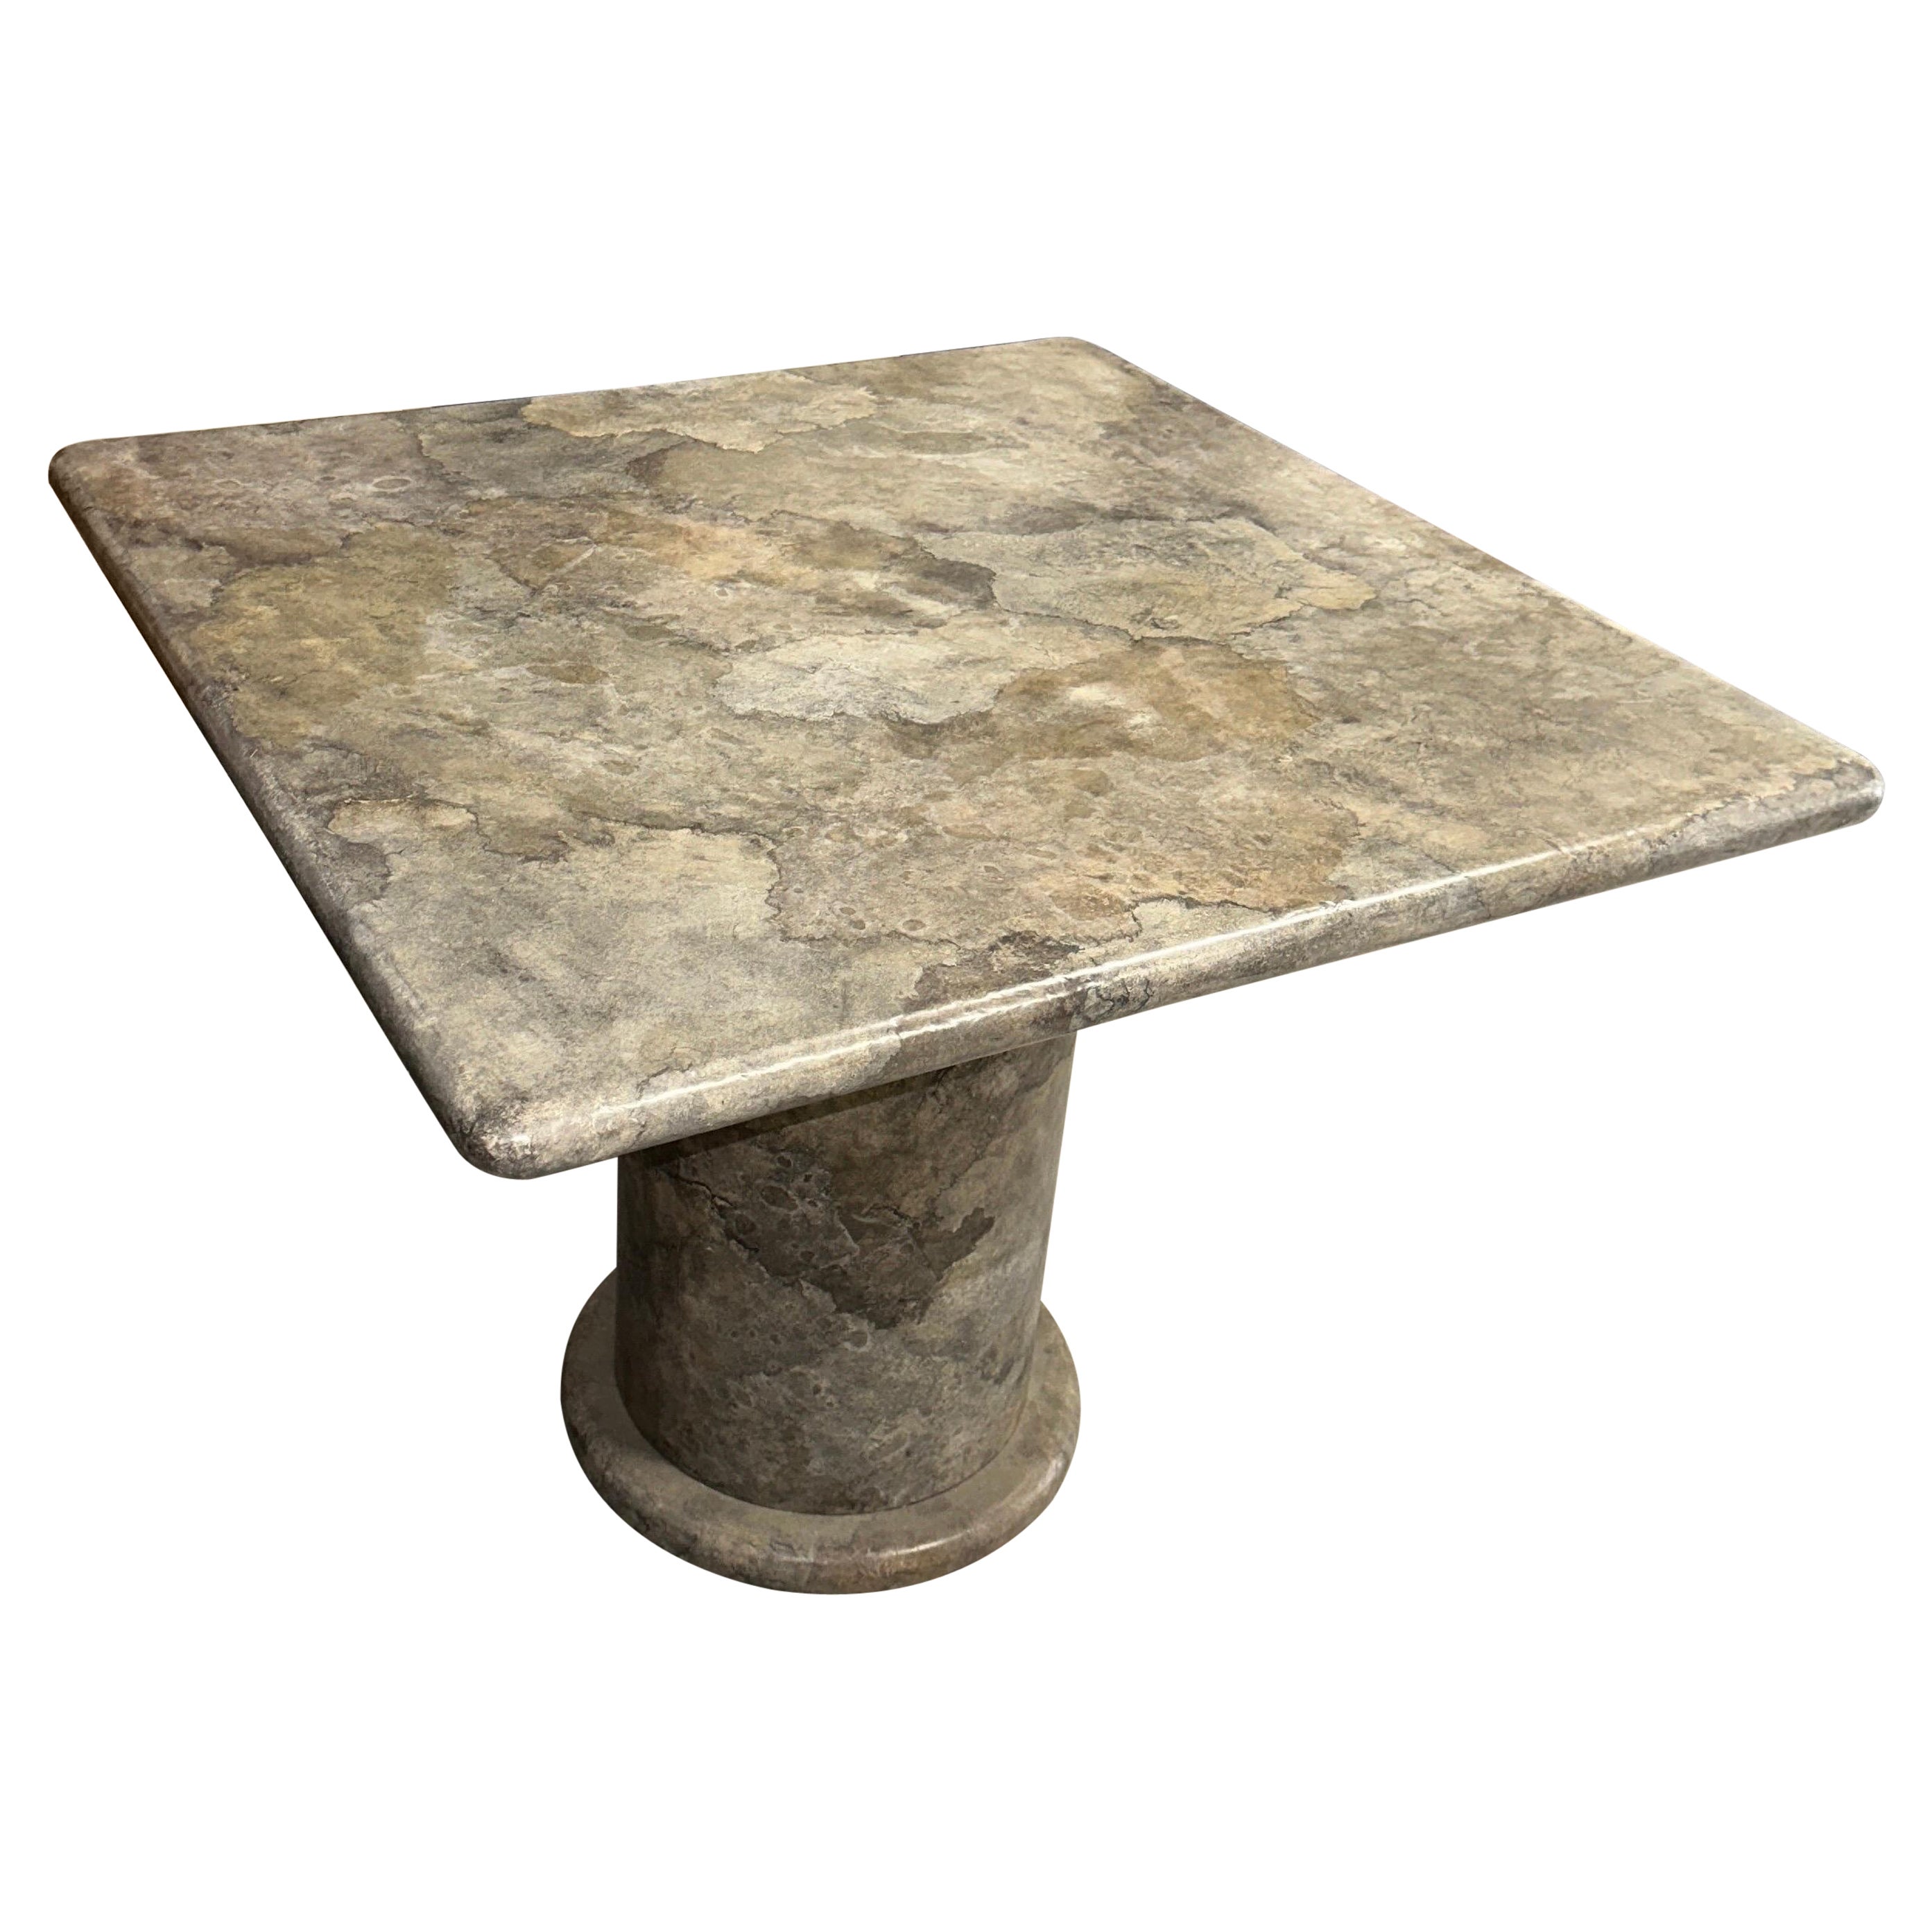  Steve Chase Designed Layered Parchment Square Table For Sale